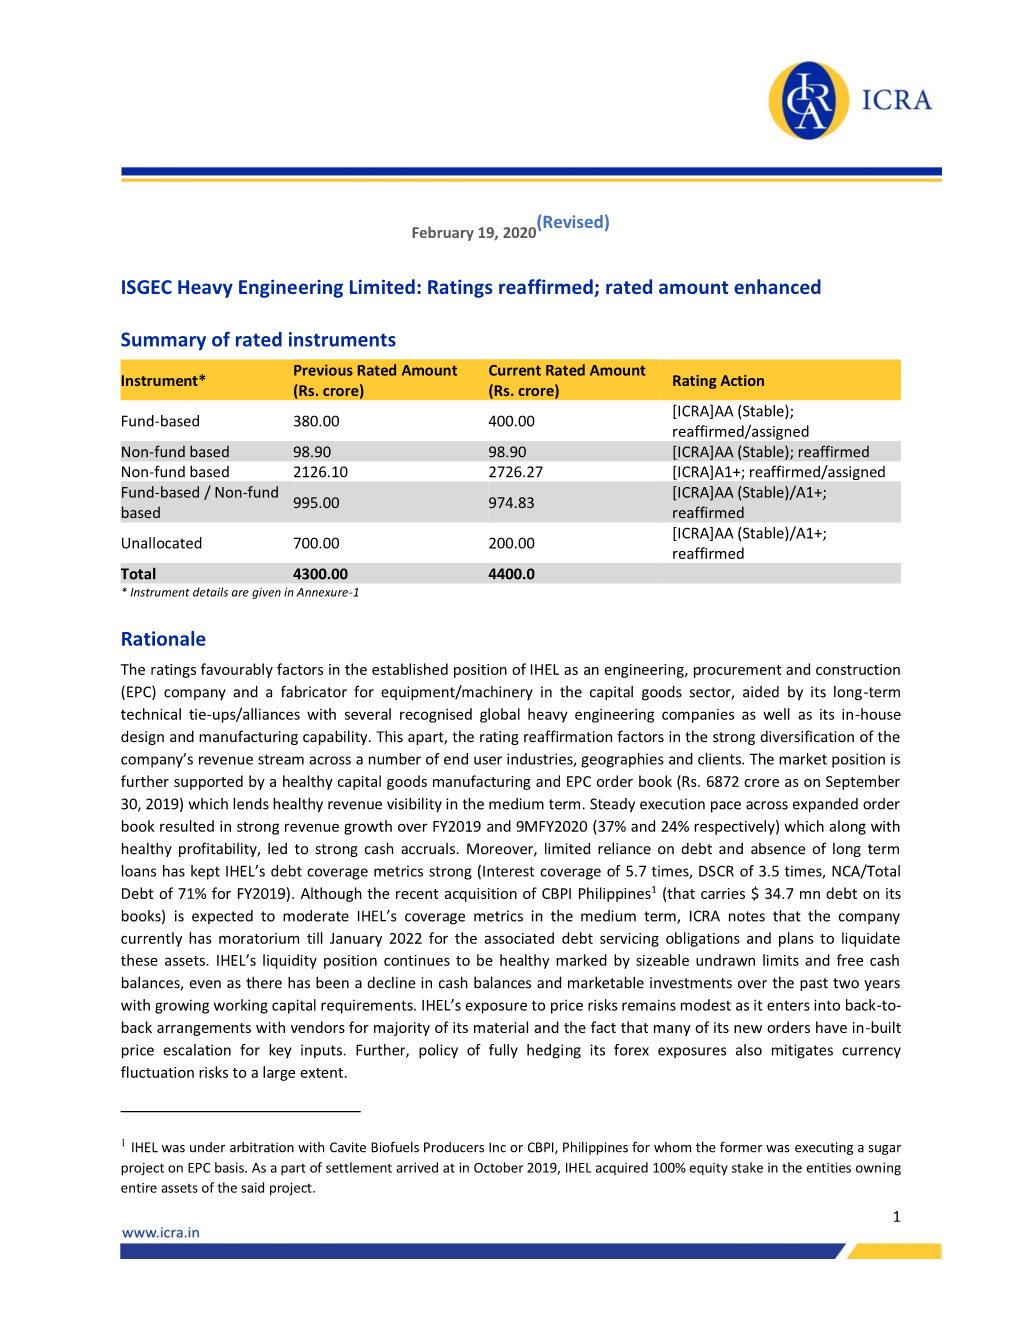 ISGEC Heavy Engineering Limited: Ratings Reaffirmed; Rated Amount Enhanced